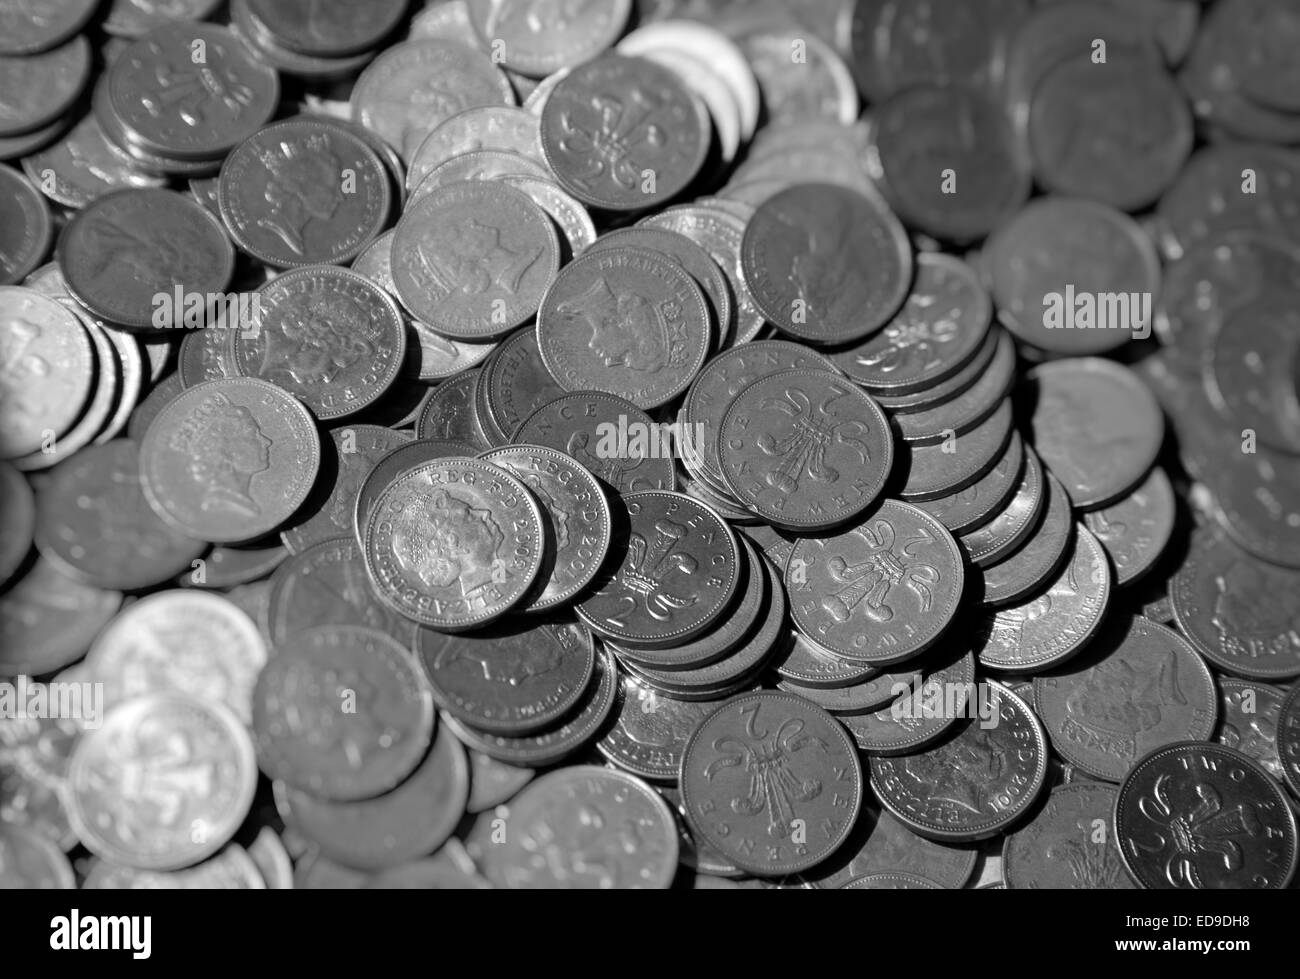 British 2 pence coins Stock Photo